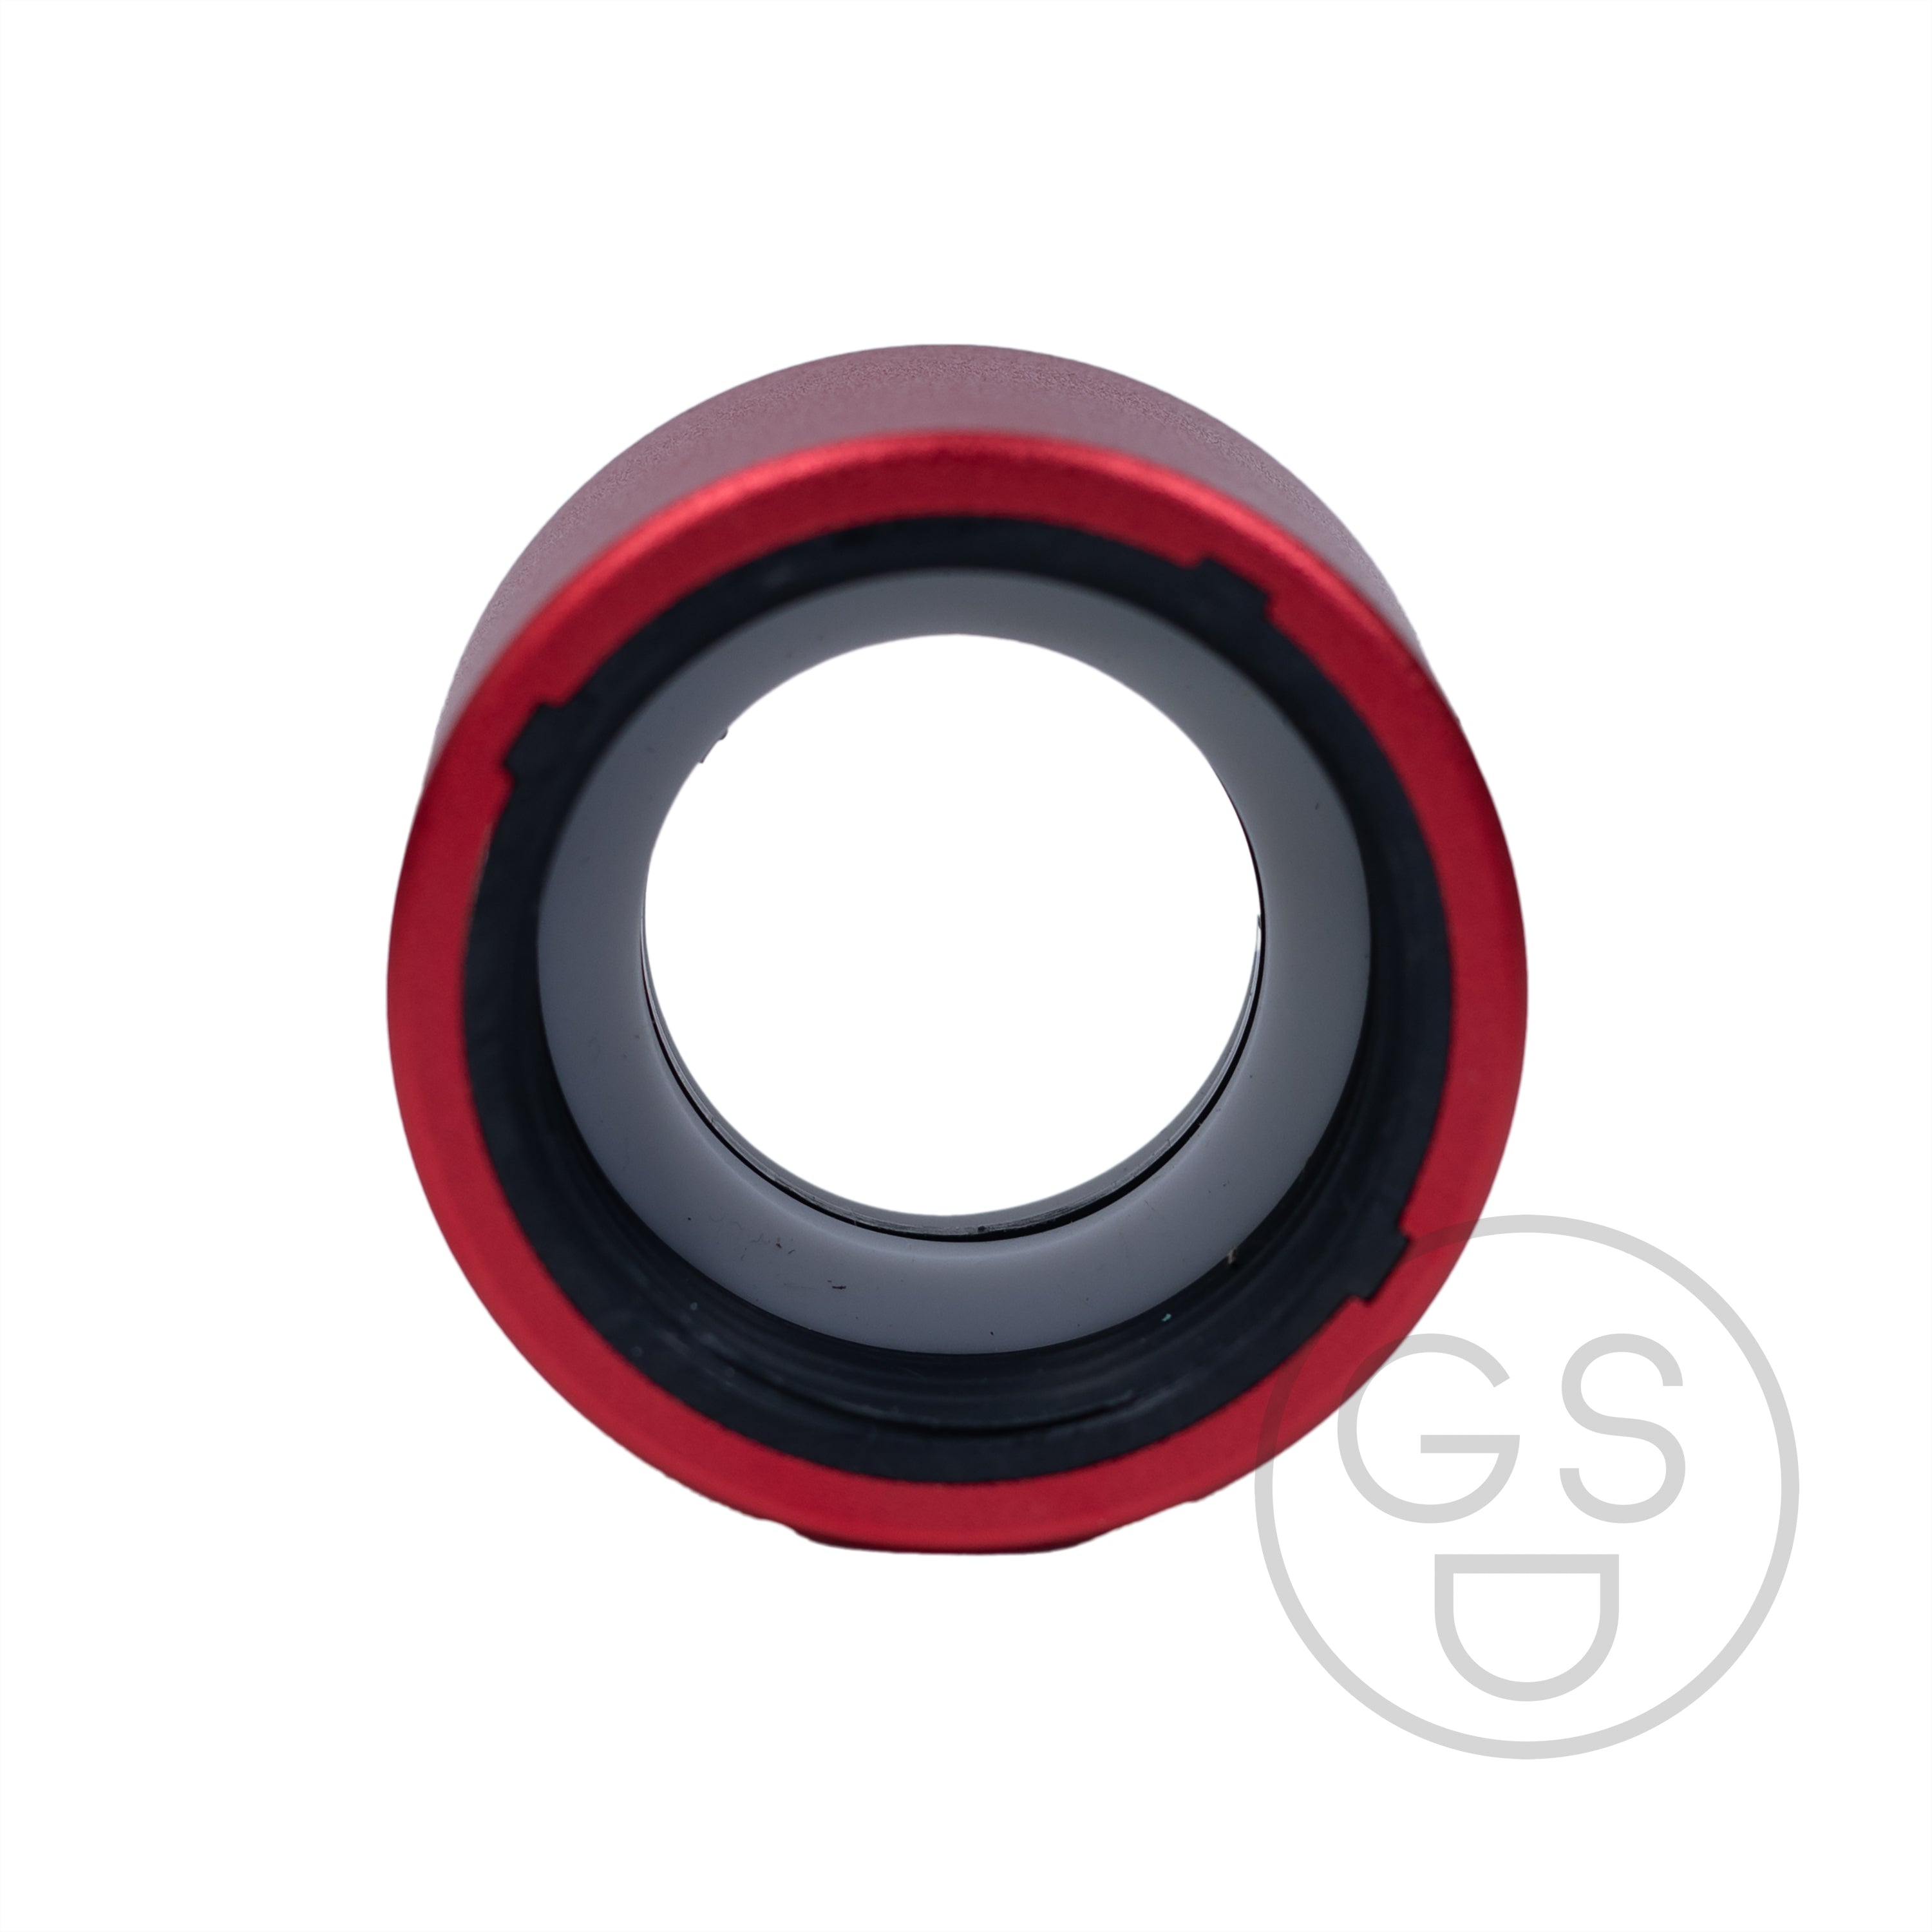 Prism Modular Waterpipe Halo Connector - Red